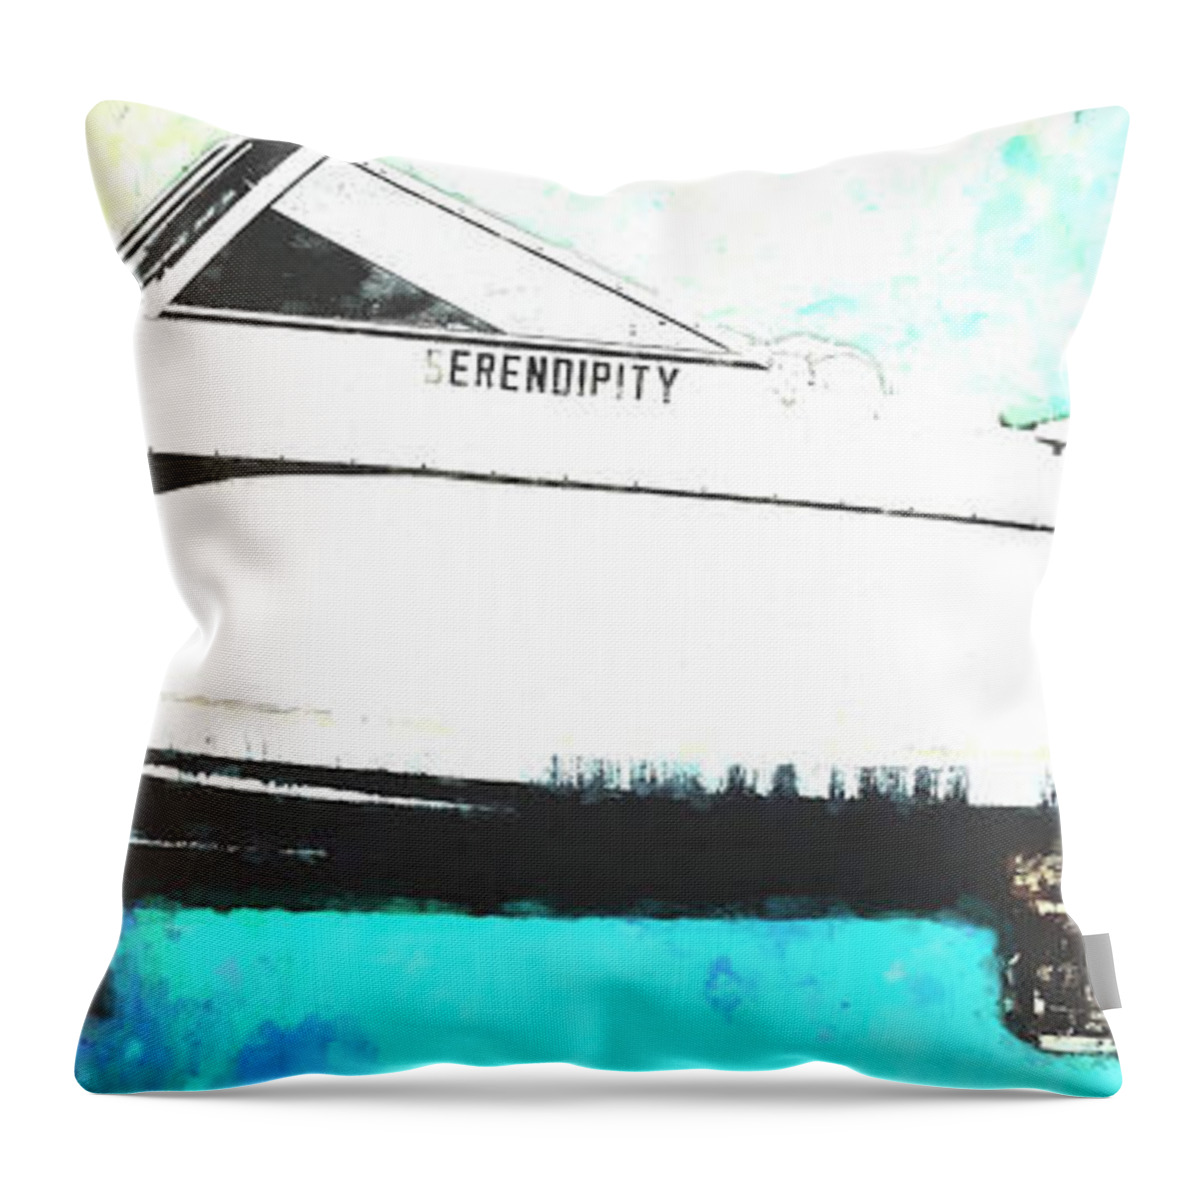 Sail Boat Throw Pillow featuring the digital art Serendipity Dry Docked by Cathy Anderson